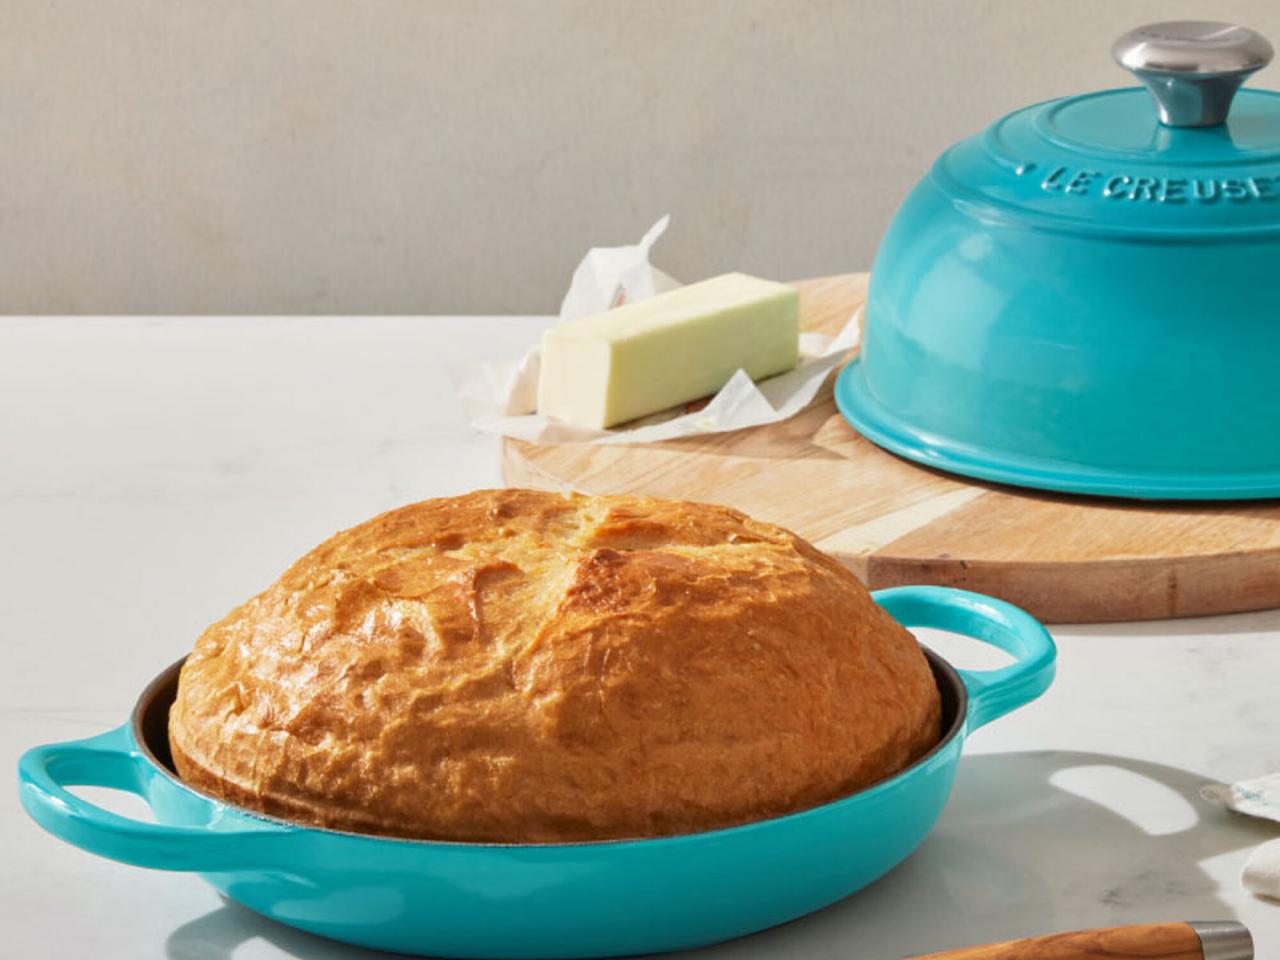 Le Creuset Bread Oven — KitchenKapers